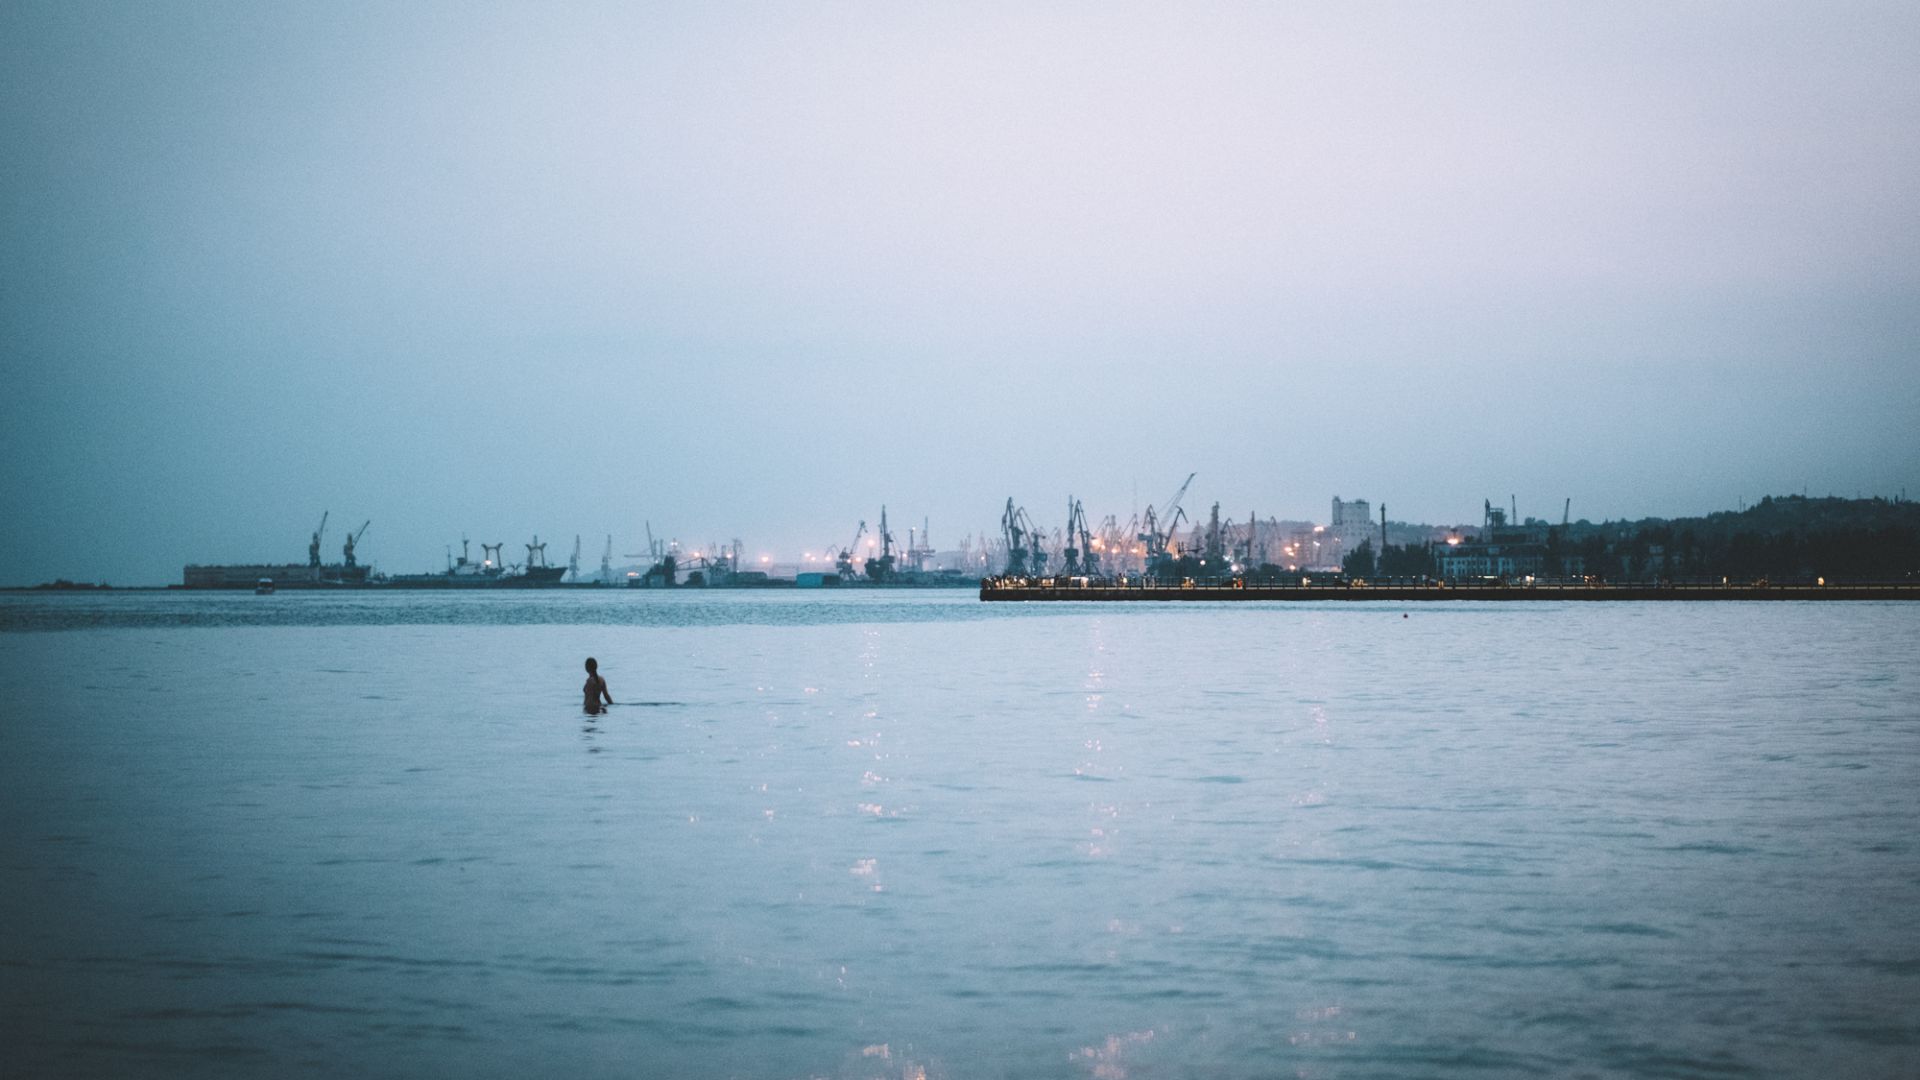 A photo of a large body of water with a person swimming in it.